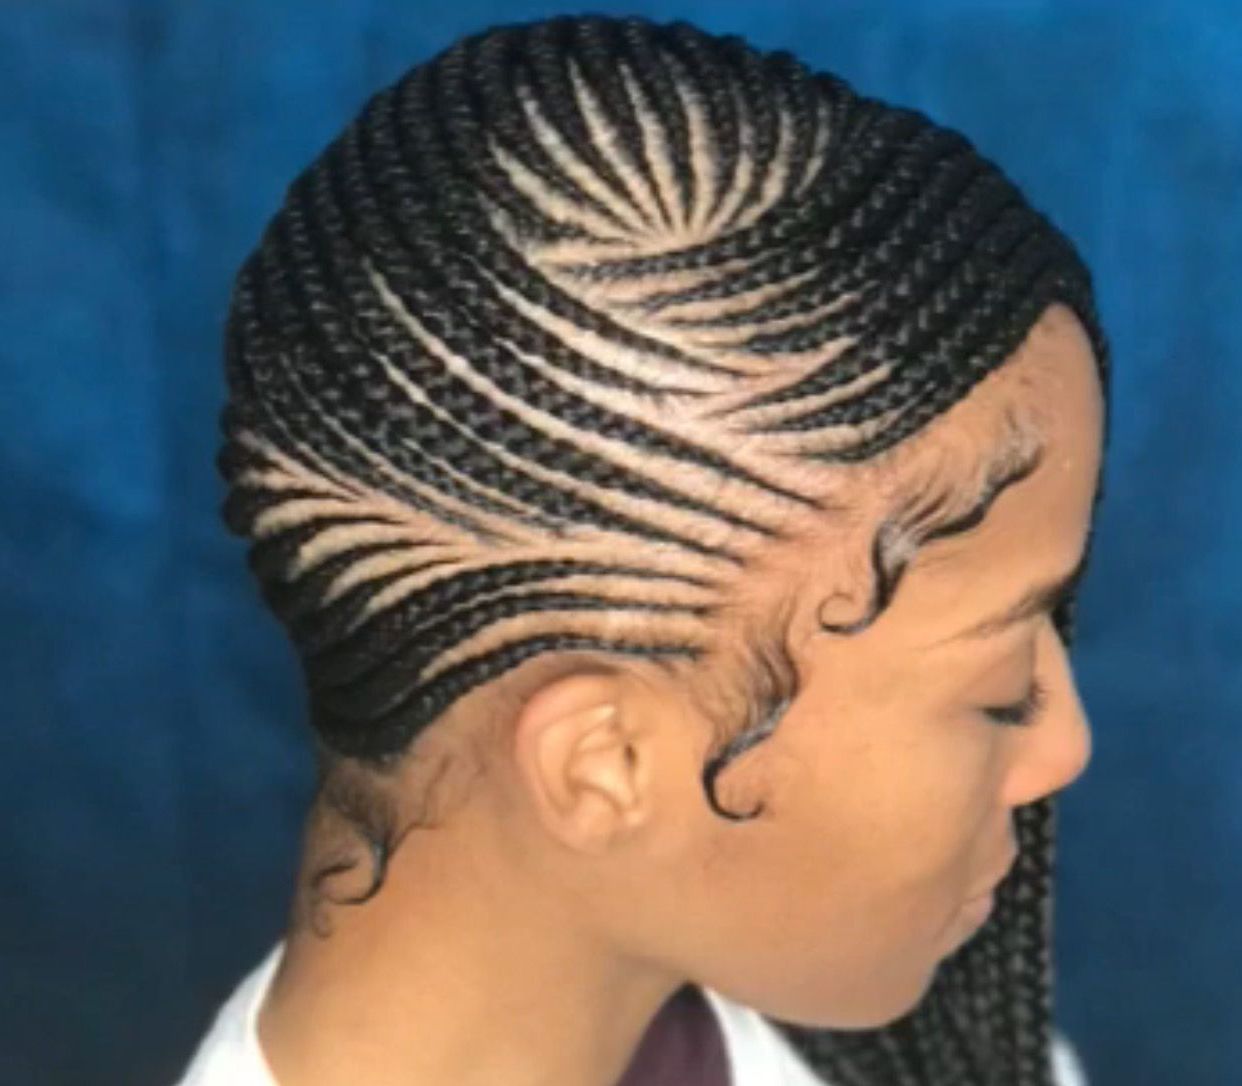 Best And Newest Diamond Goddess Lemonade Braided Hairstyles Inside 40+ Totally Gorgeous Ghana Braids Hairstyles (View 8 of 20)